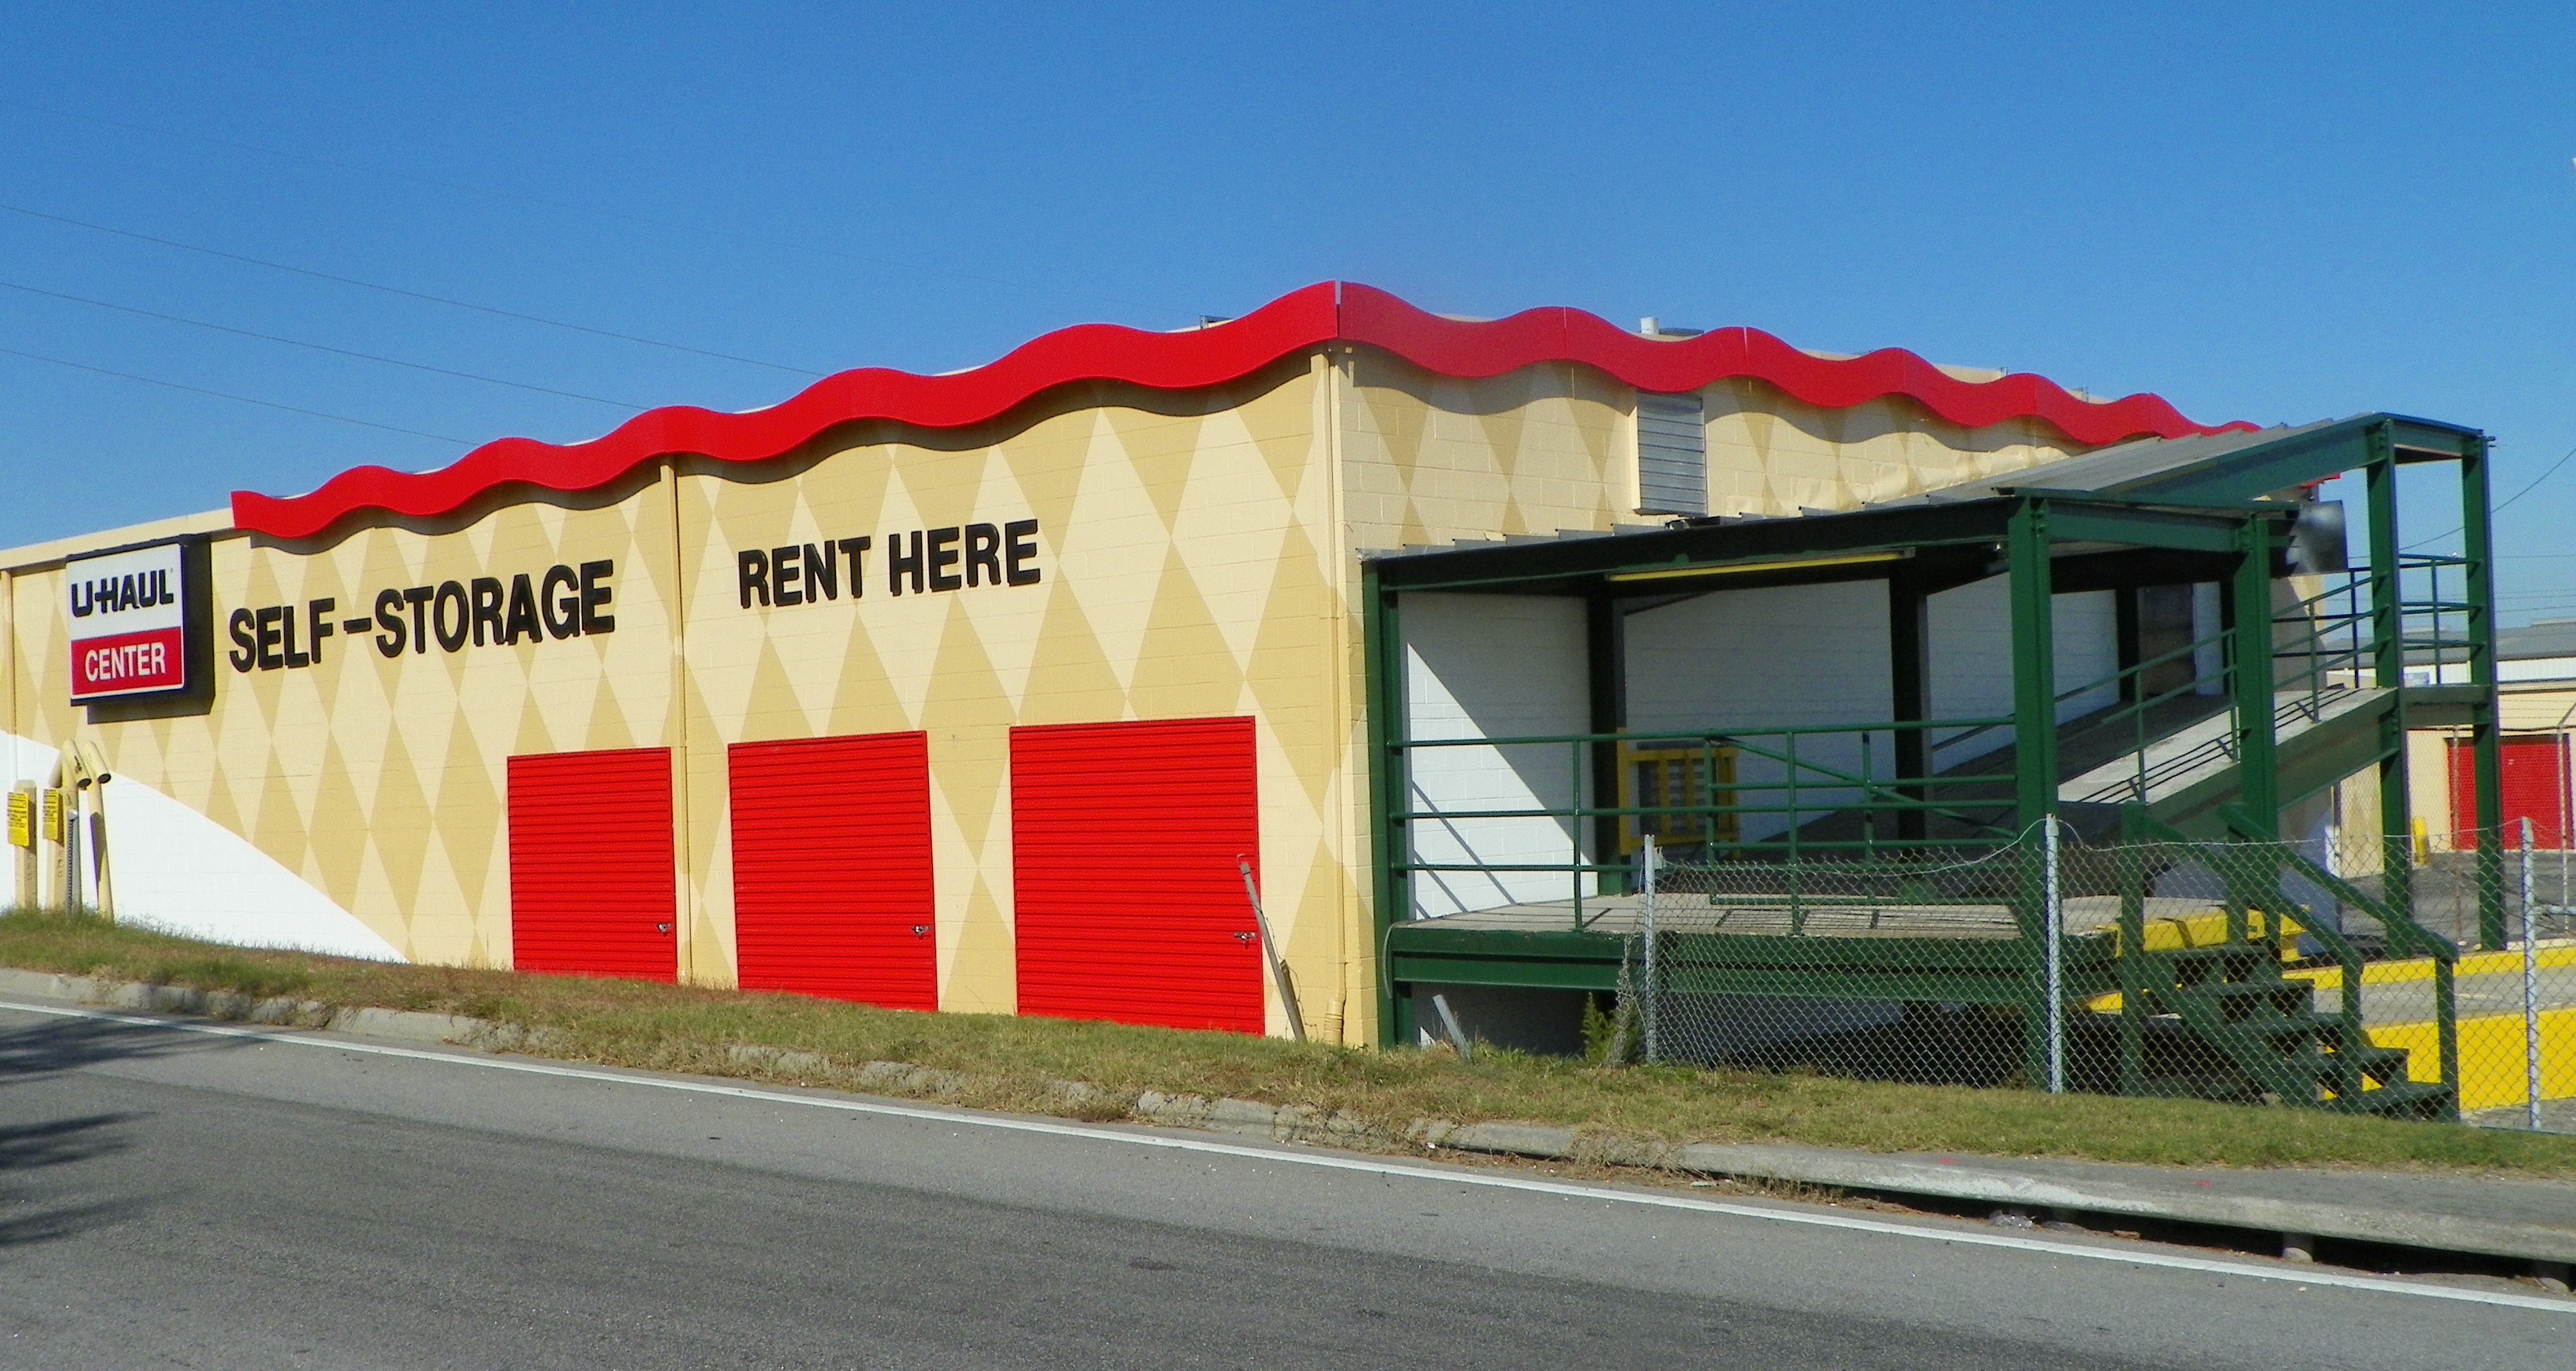 U-Haul stores in Charleston and other parts of South Carolina are offering 30 days free self-storage after Hurricane Joaquin.